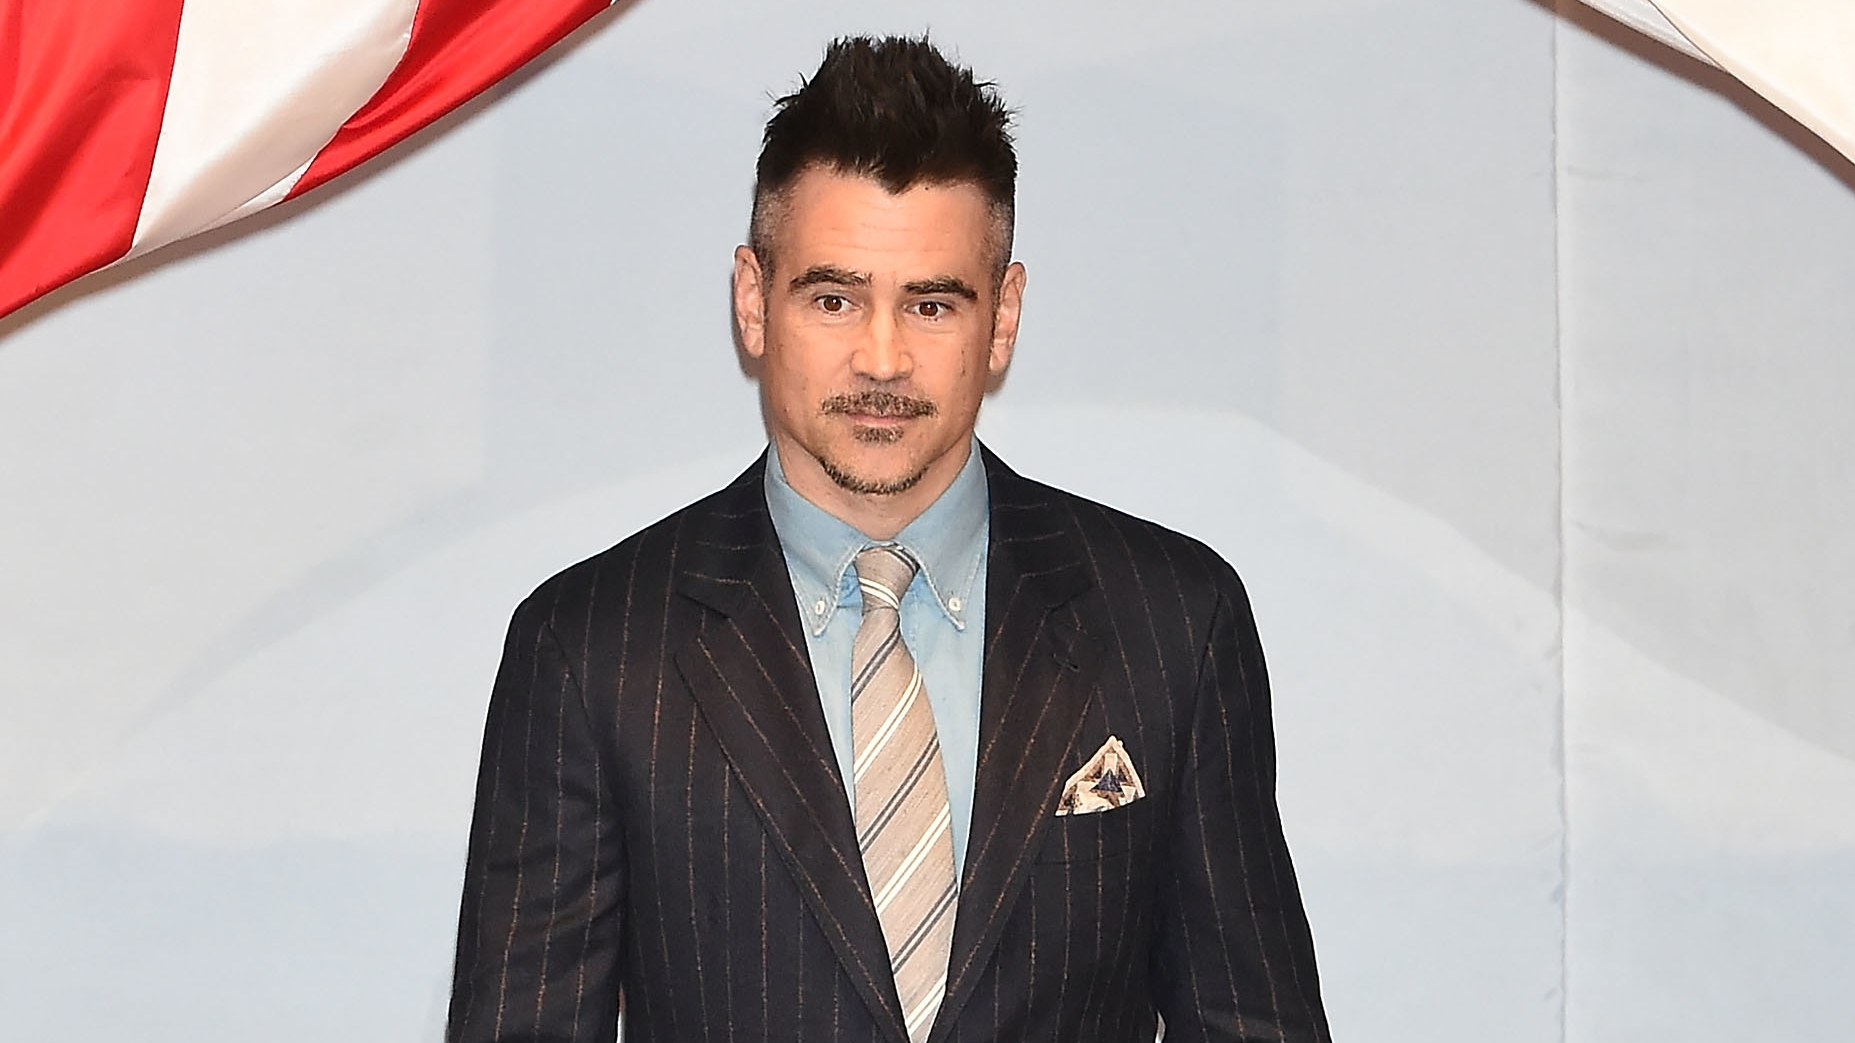 'The Batman': Colin Farrell in talks to play the Penguin